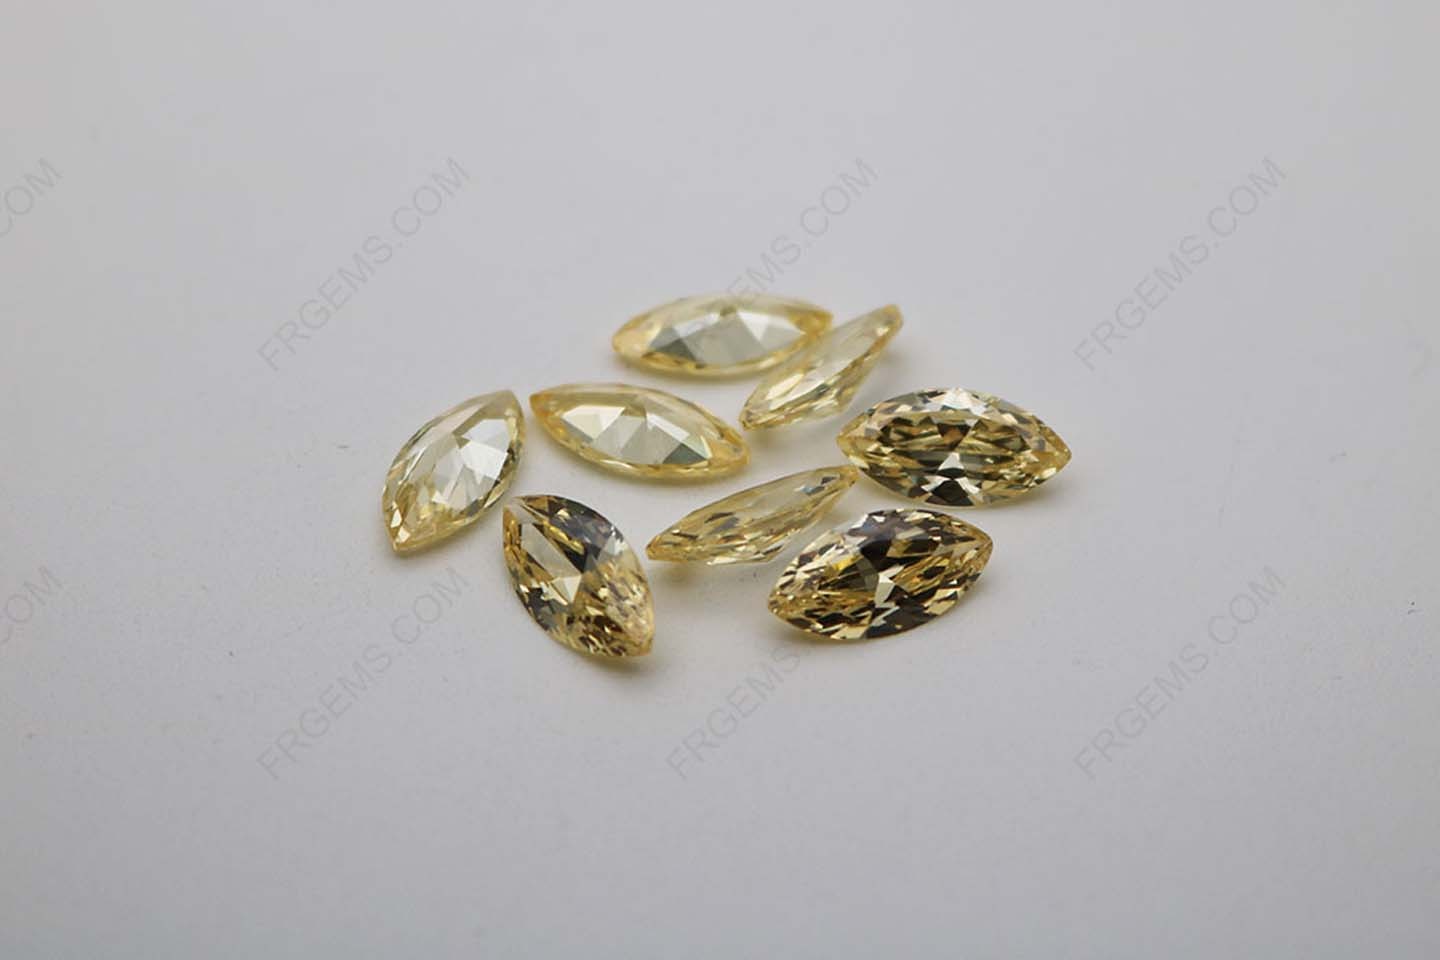 Cubic Zirconia Canary Yellow Marquise Shape 10x5mm stones CZ06 IMG_1021